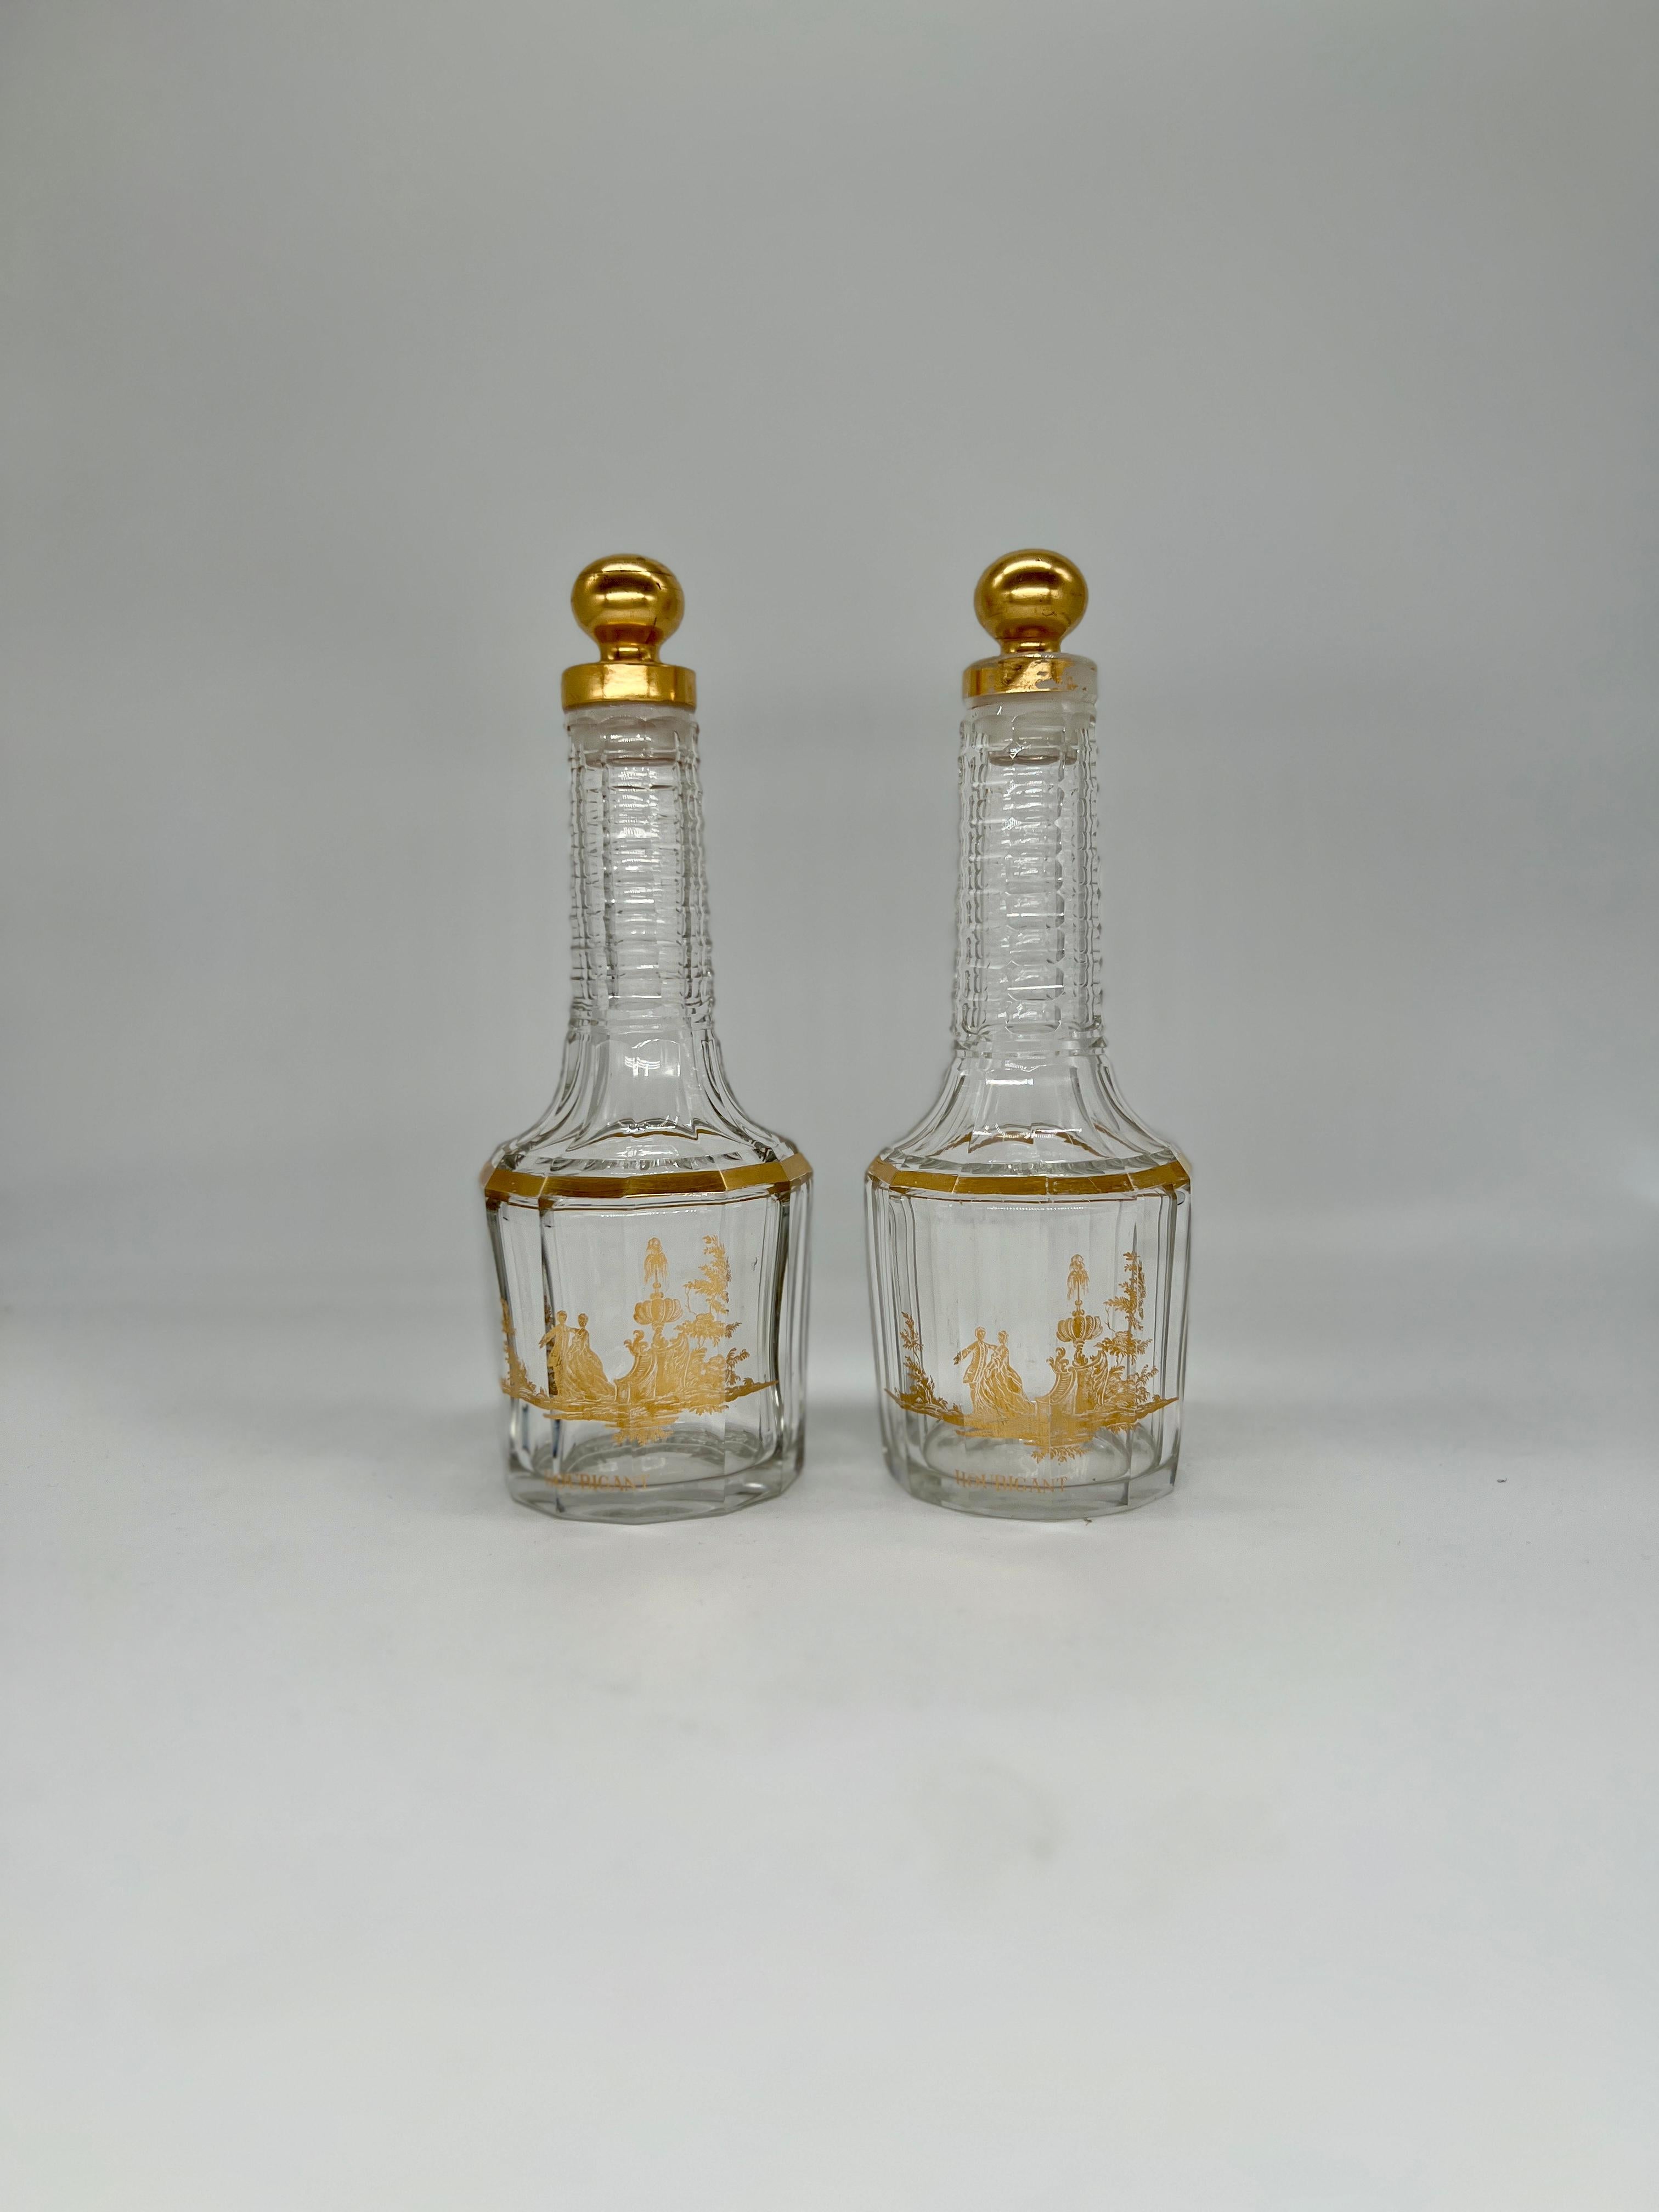 Baccarat (French, founded 1764), circa 1920. 

Offered is a great pair of antique French Baccarat Houbigant pattern gilt crystal perfume bottles, circa 1920. These would make great individual decanter bottles too! 

Each bottle tells a story of